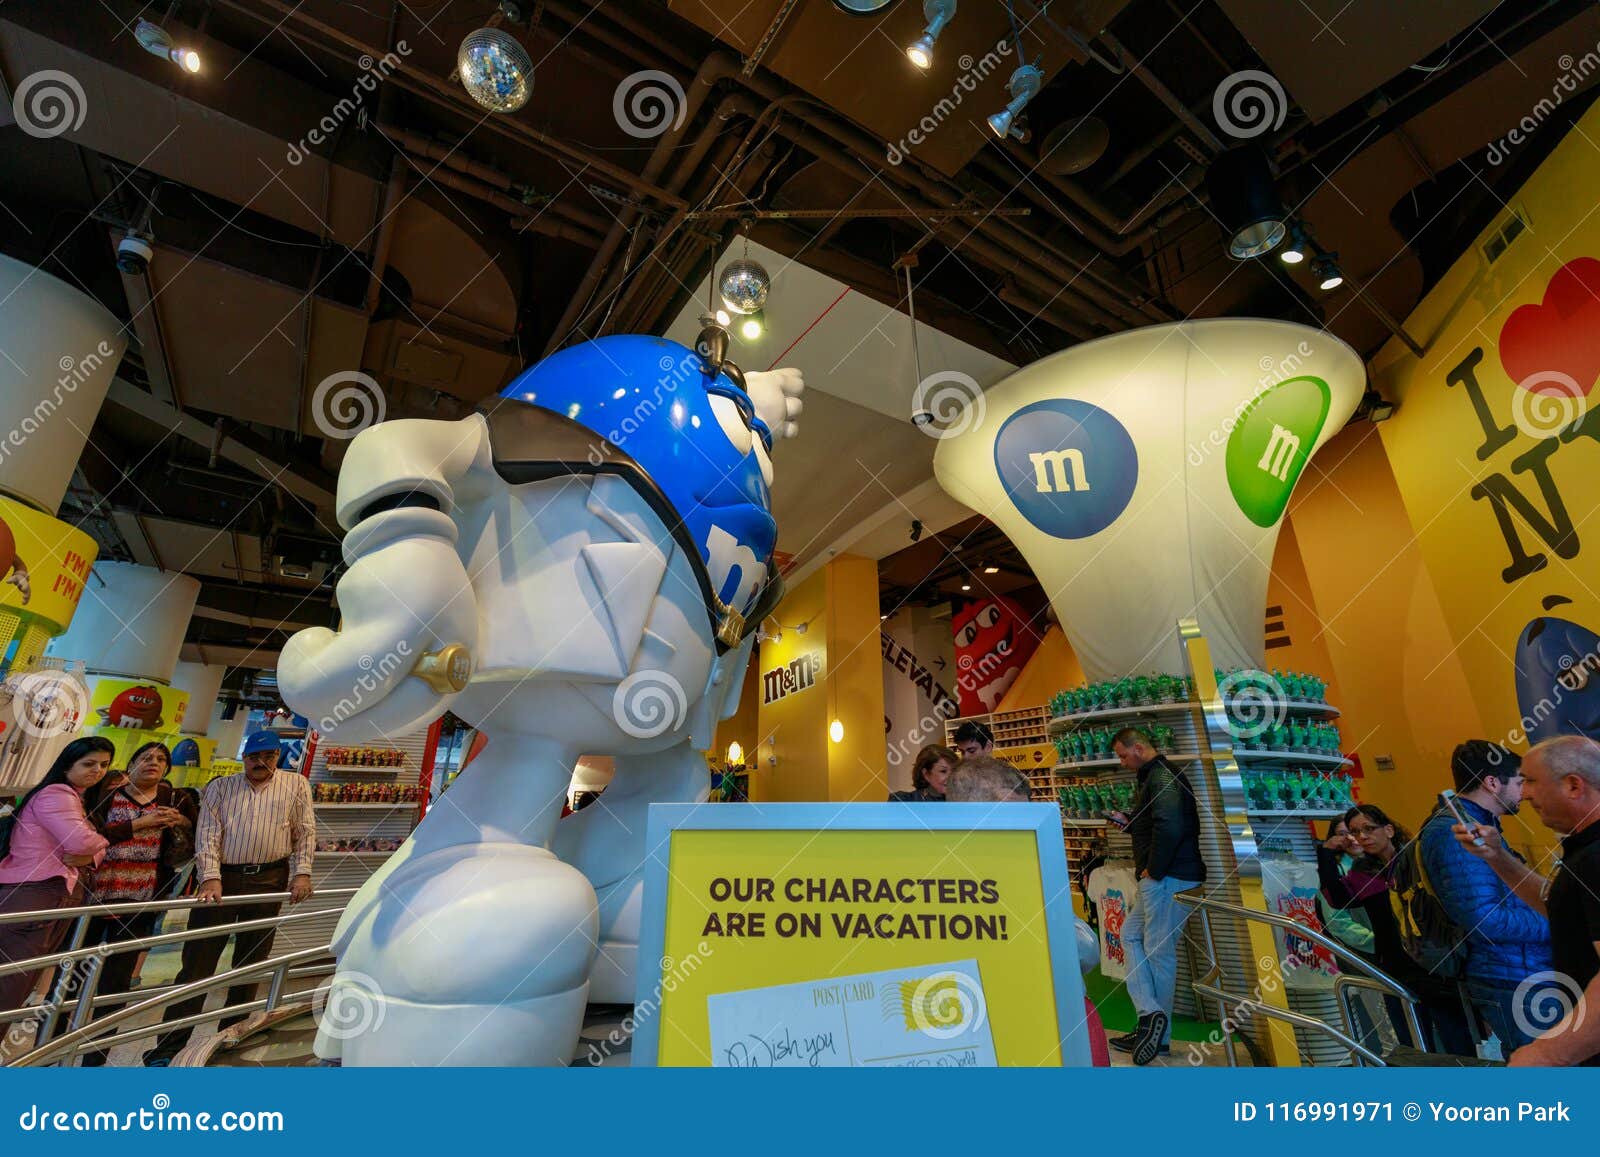 NYC ♥ NYC: M&M's World Store in Times Square